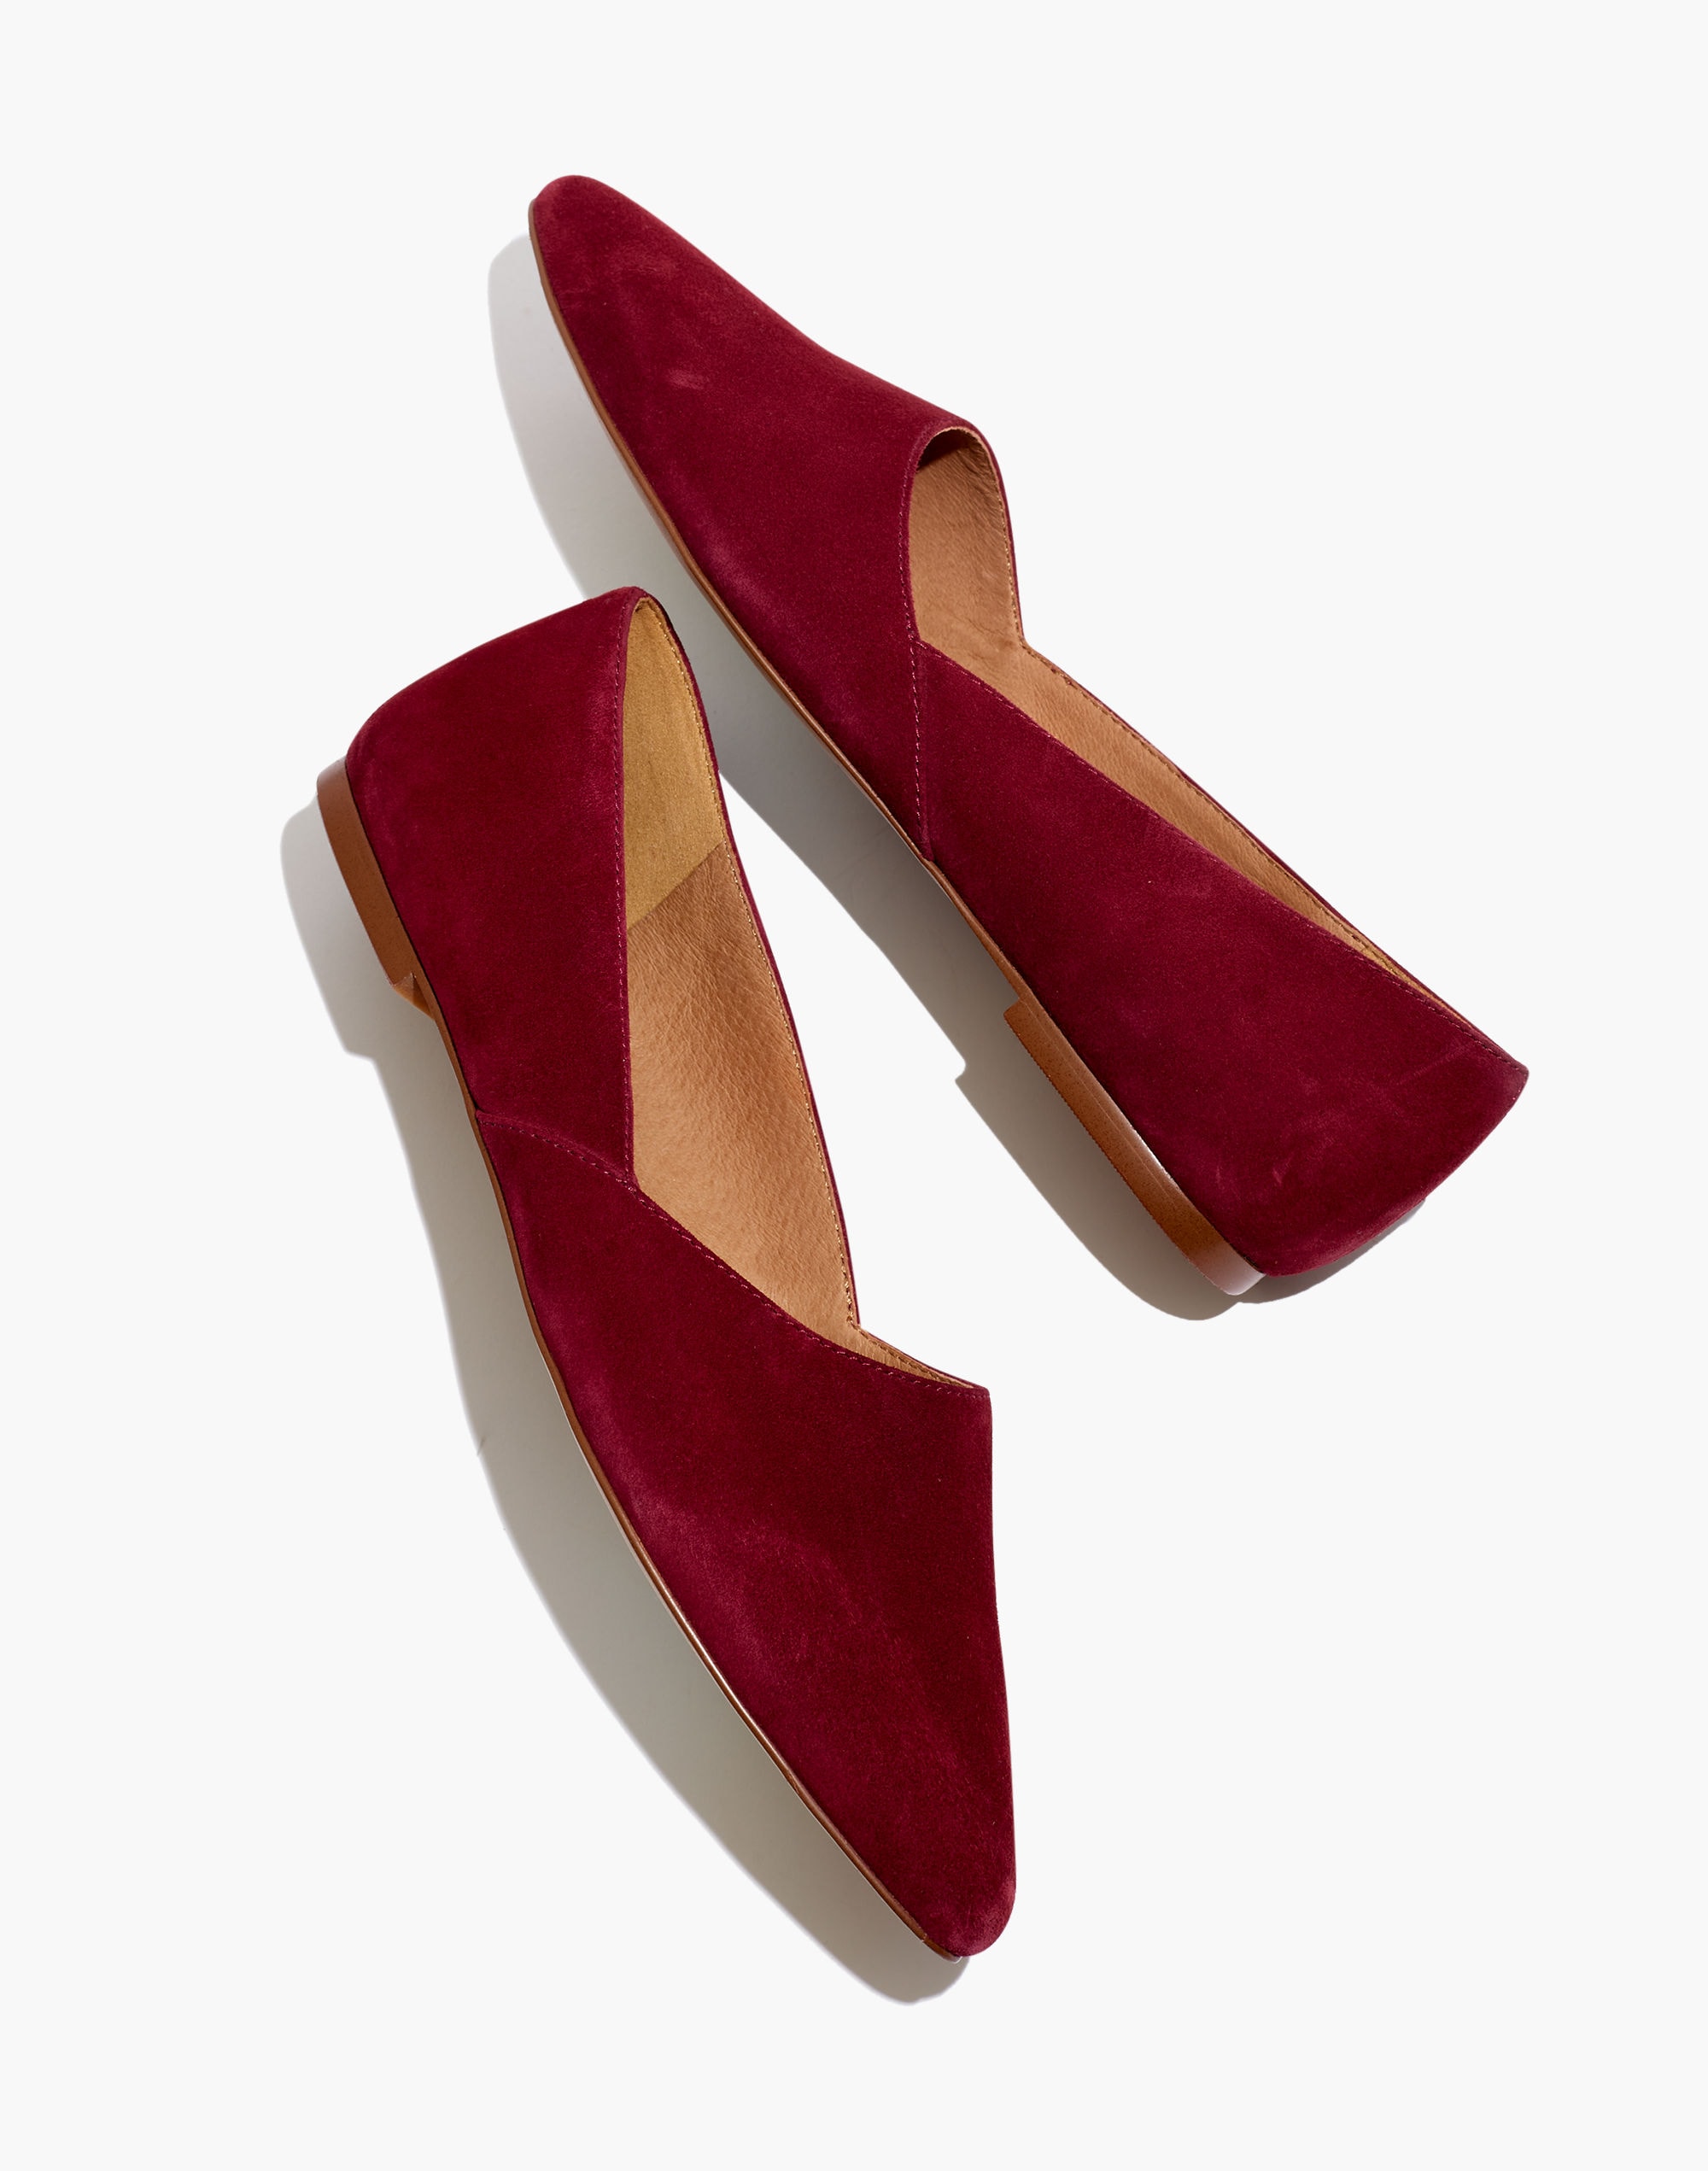 The Lizbeth Flat in Suede